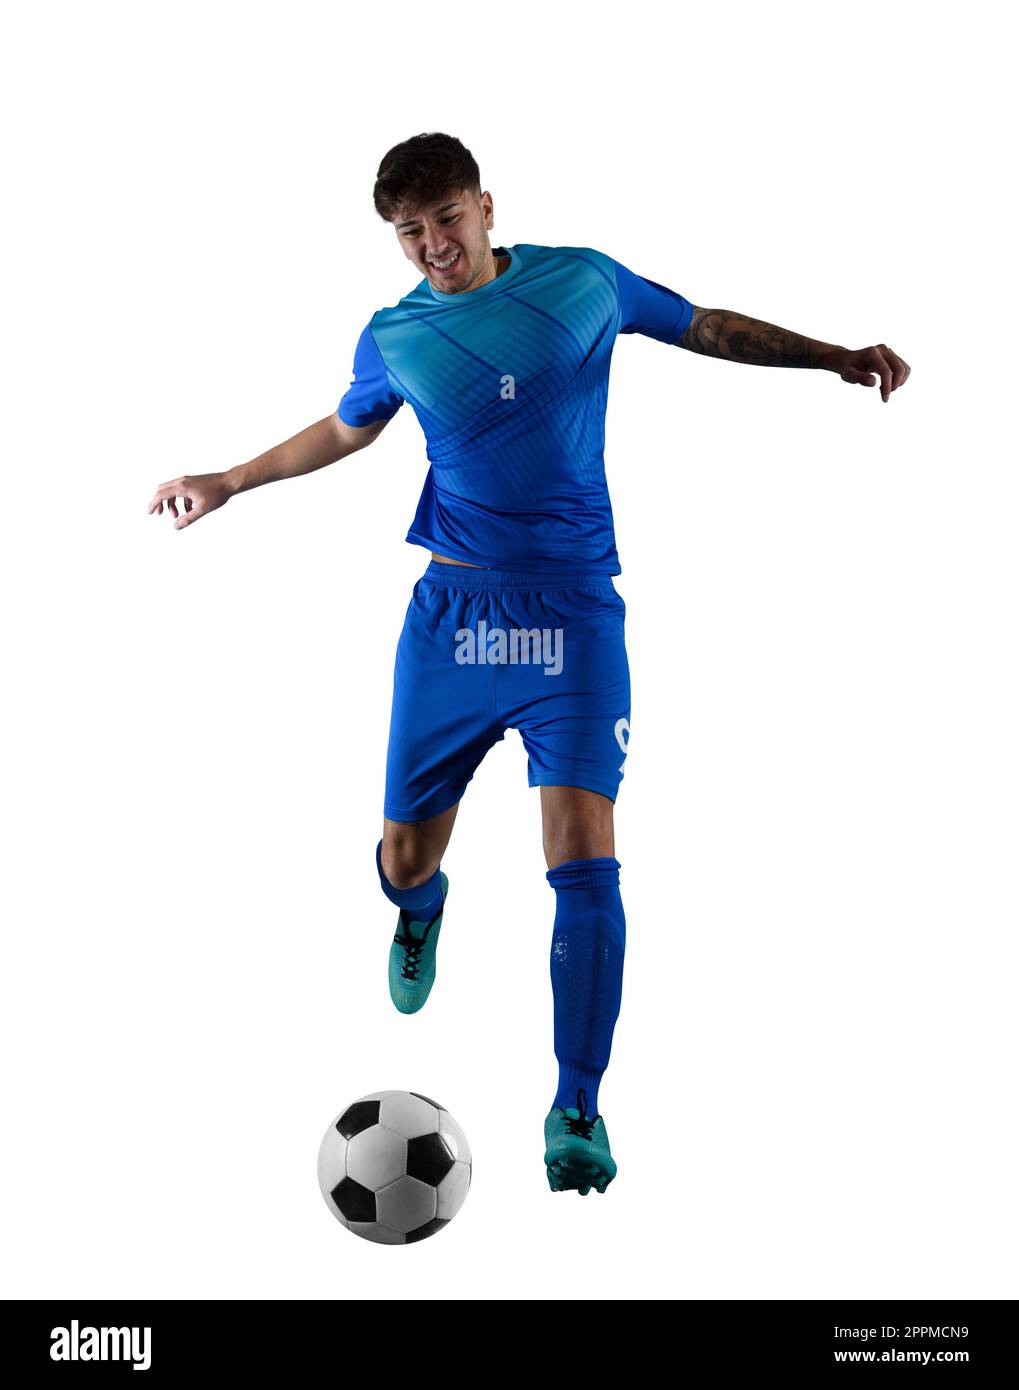 Football player ready to kick the soccerball during the match Stock Photo